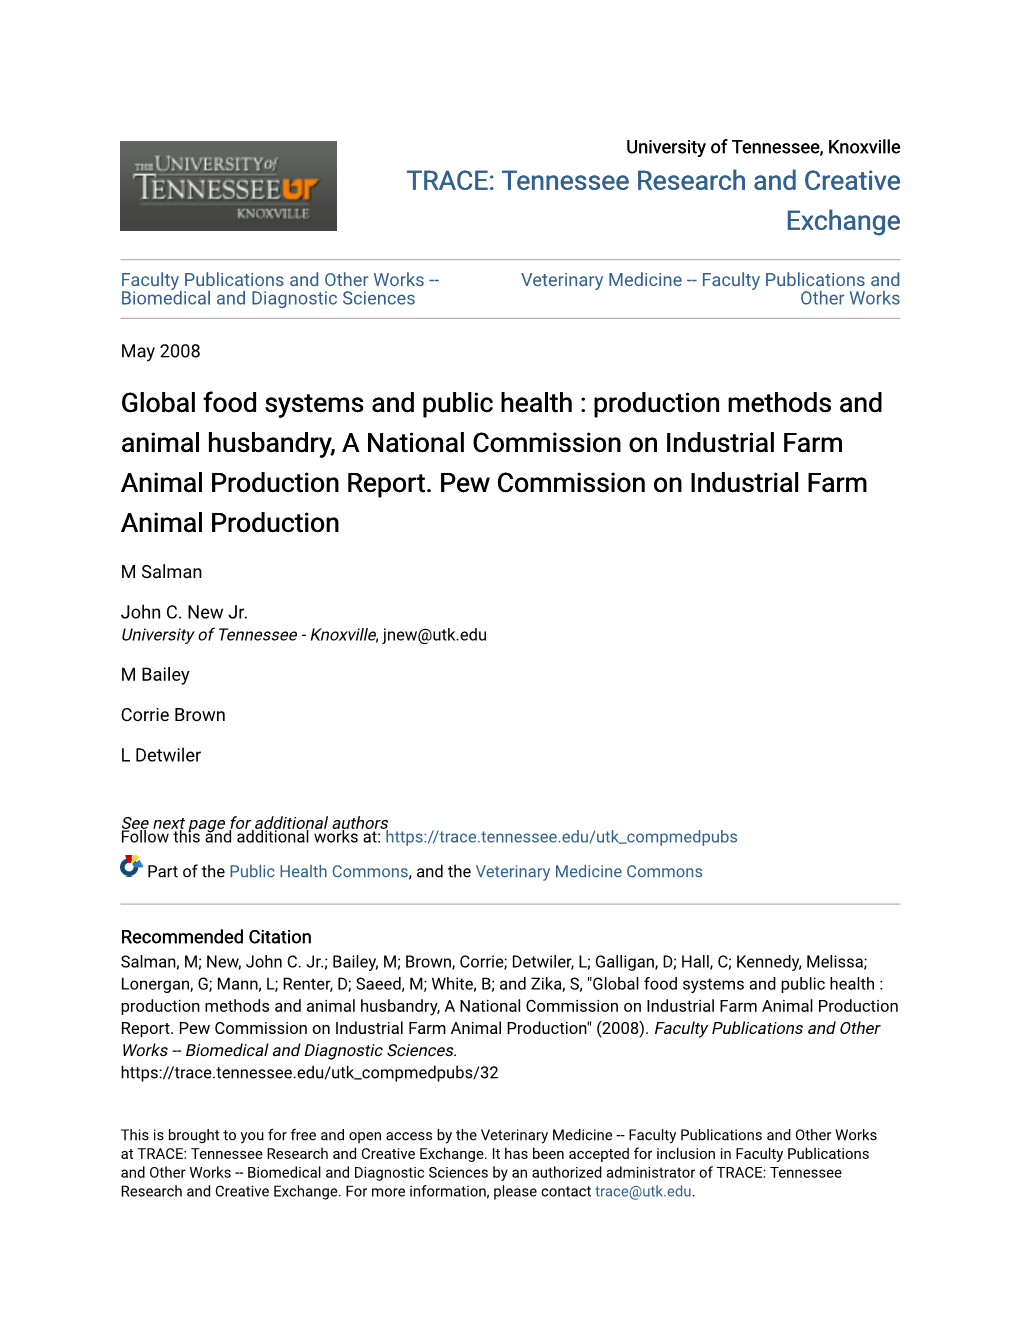 Global Food Systems and Public Health : Production Methods and Animal Husbandry, a National Commission on Industrial Farm Animal Production Report